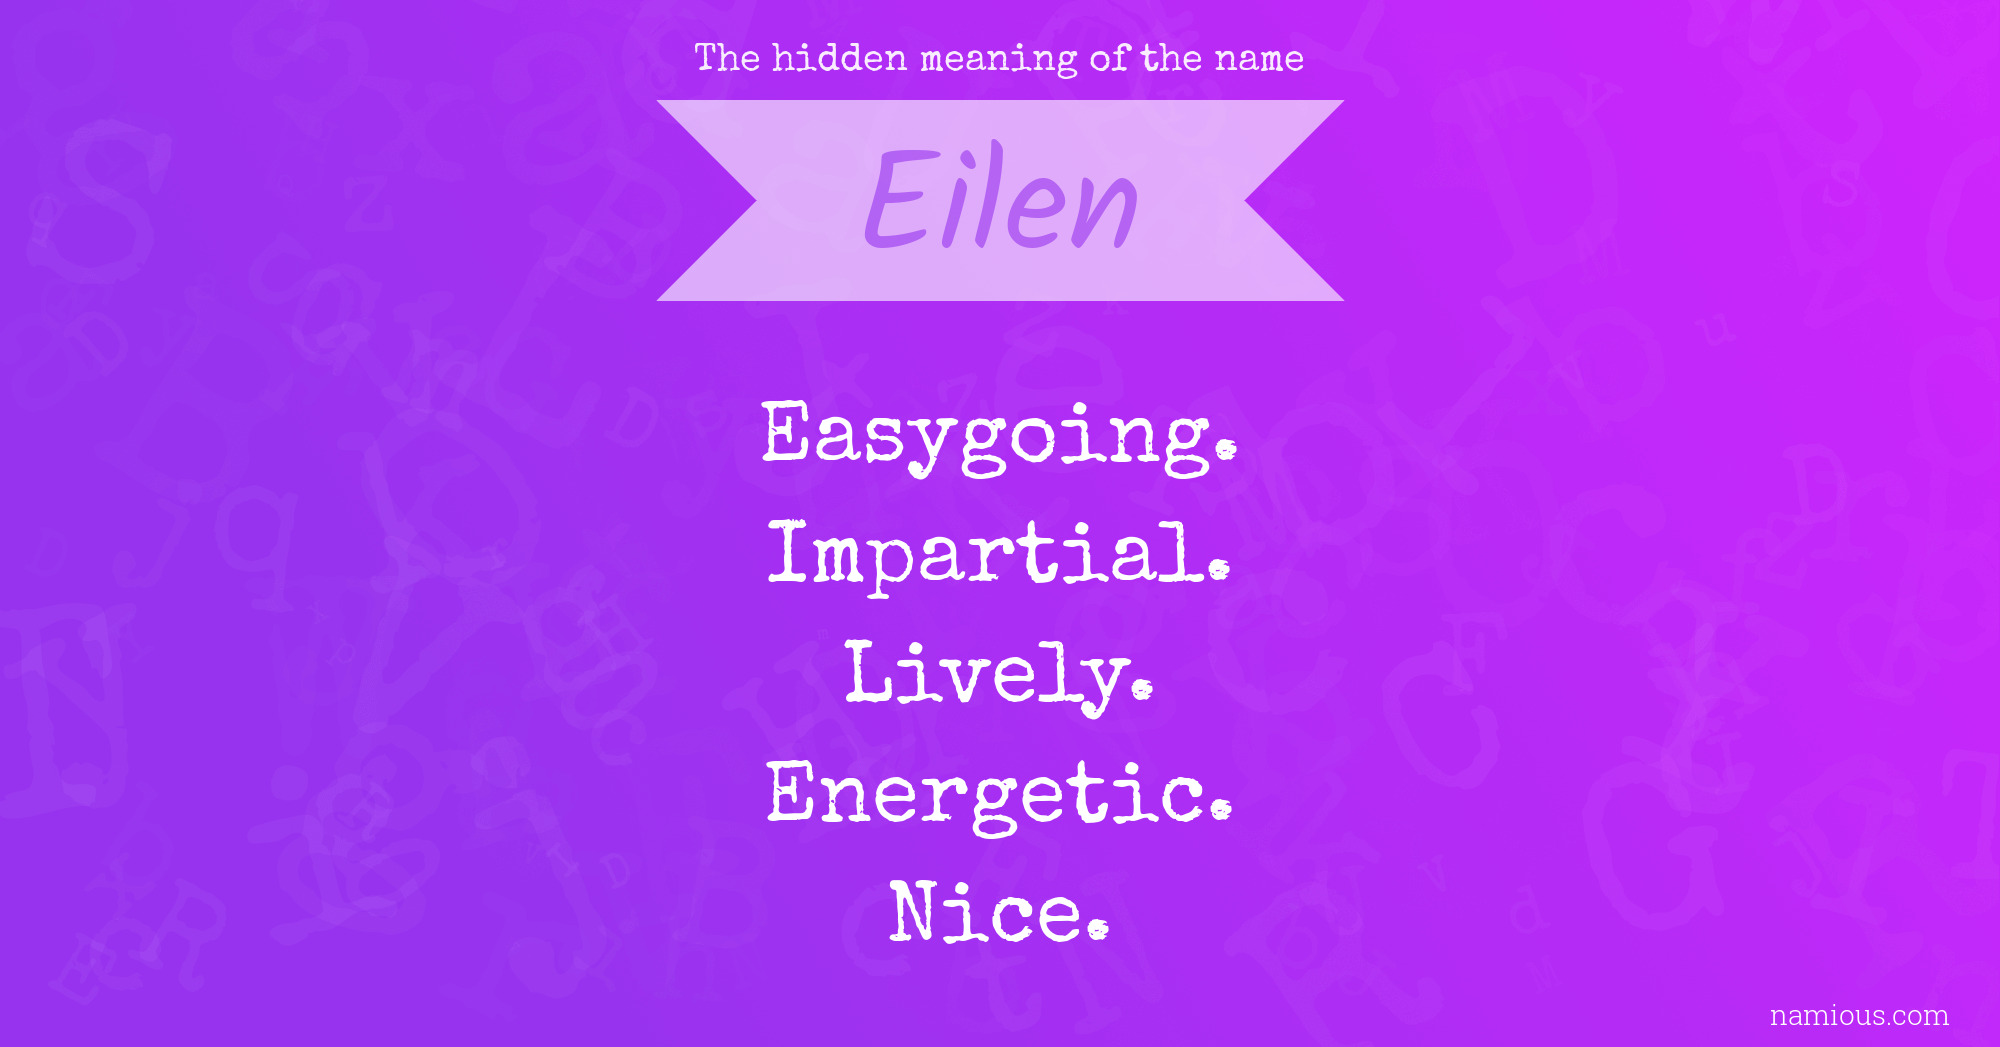 The hidden meaning of the name Eilen